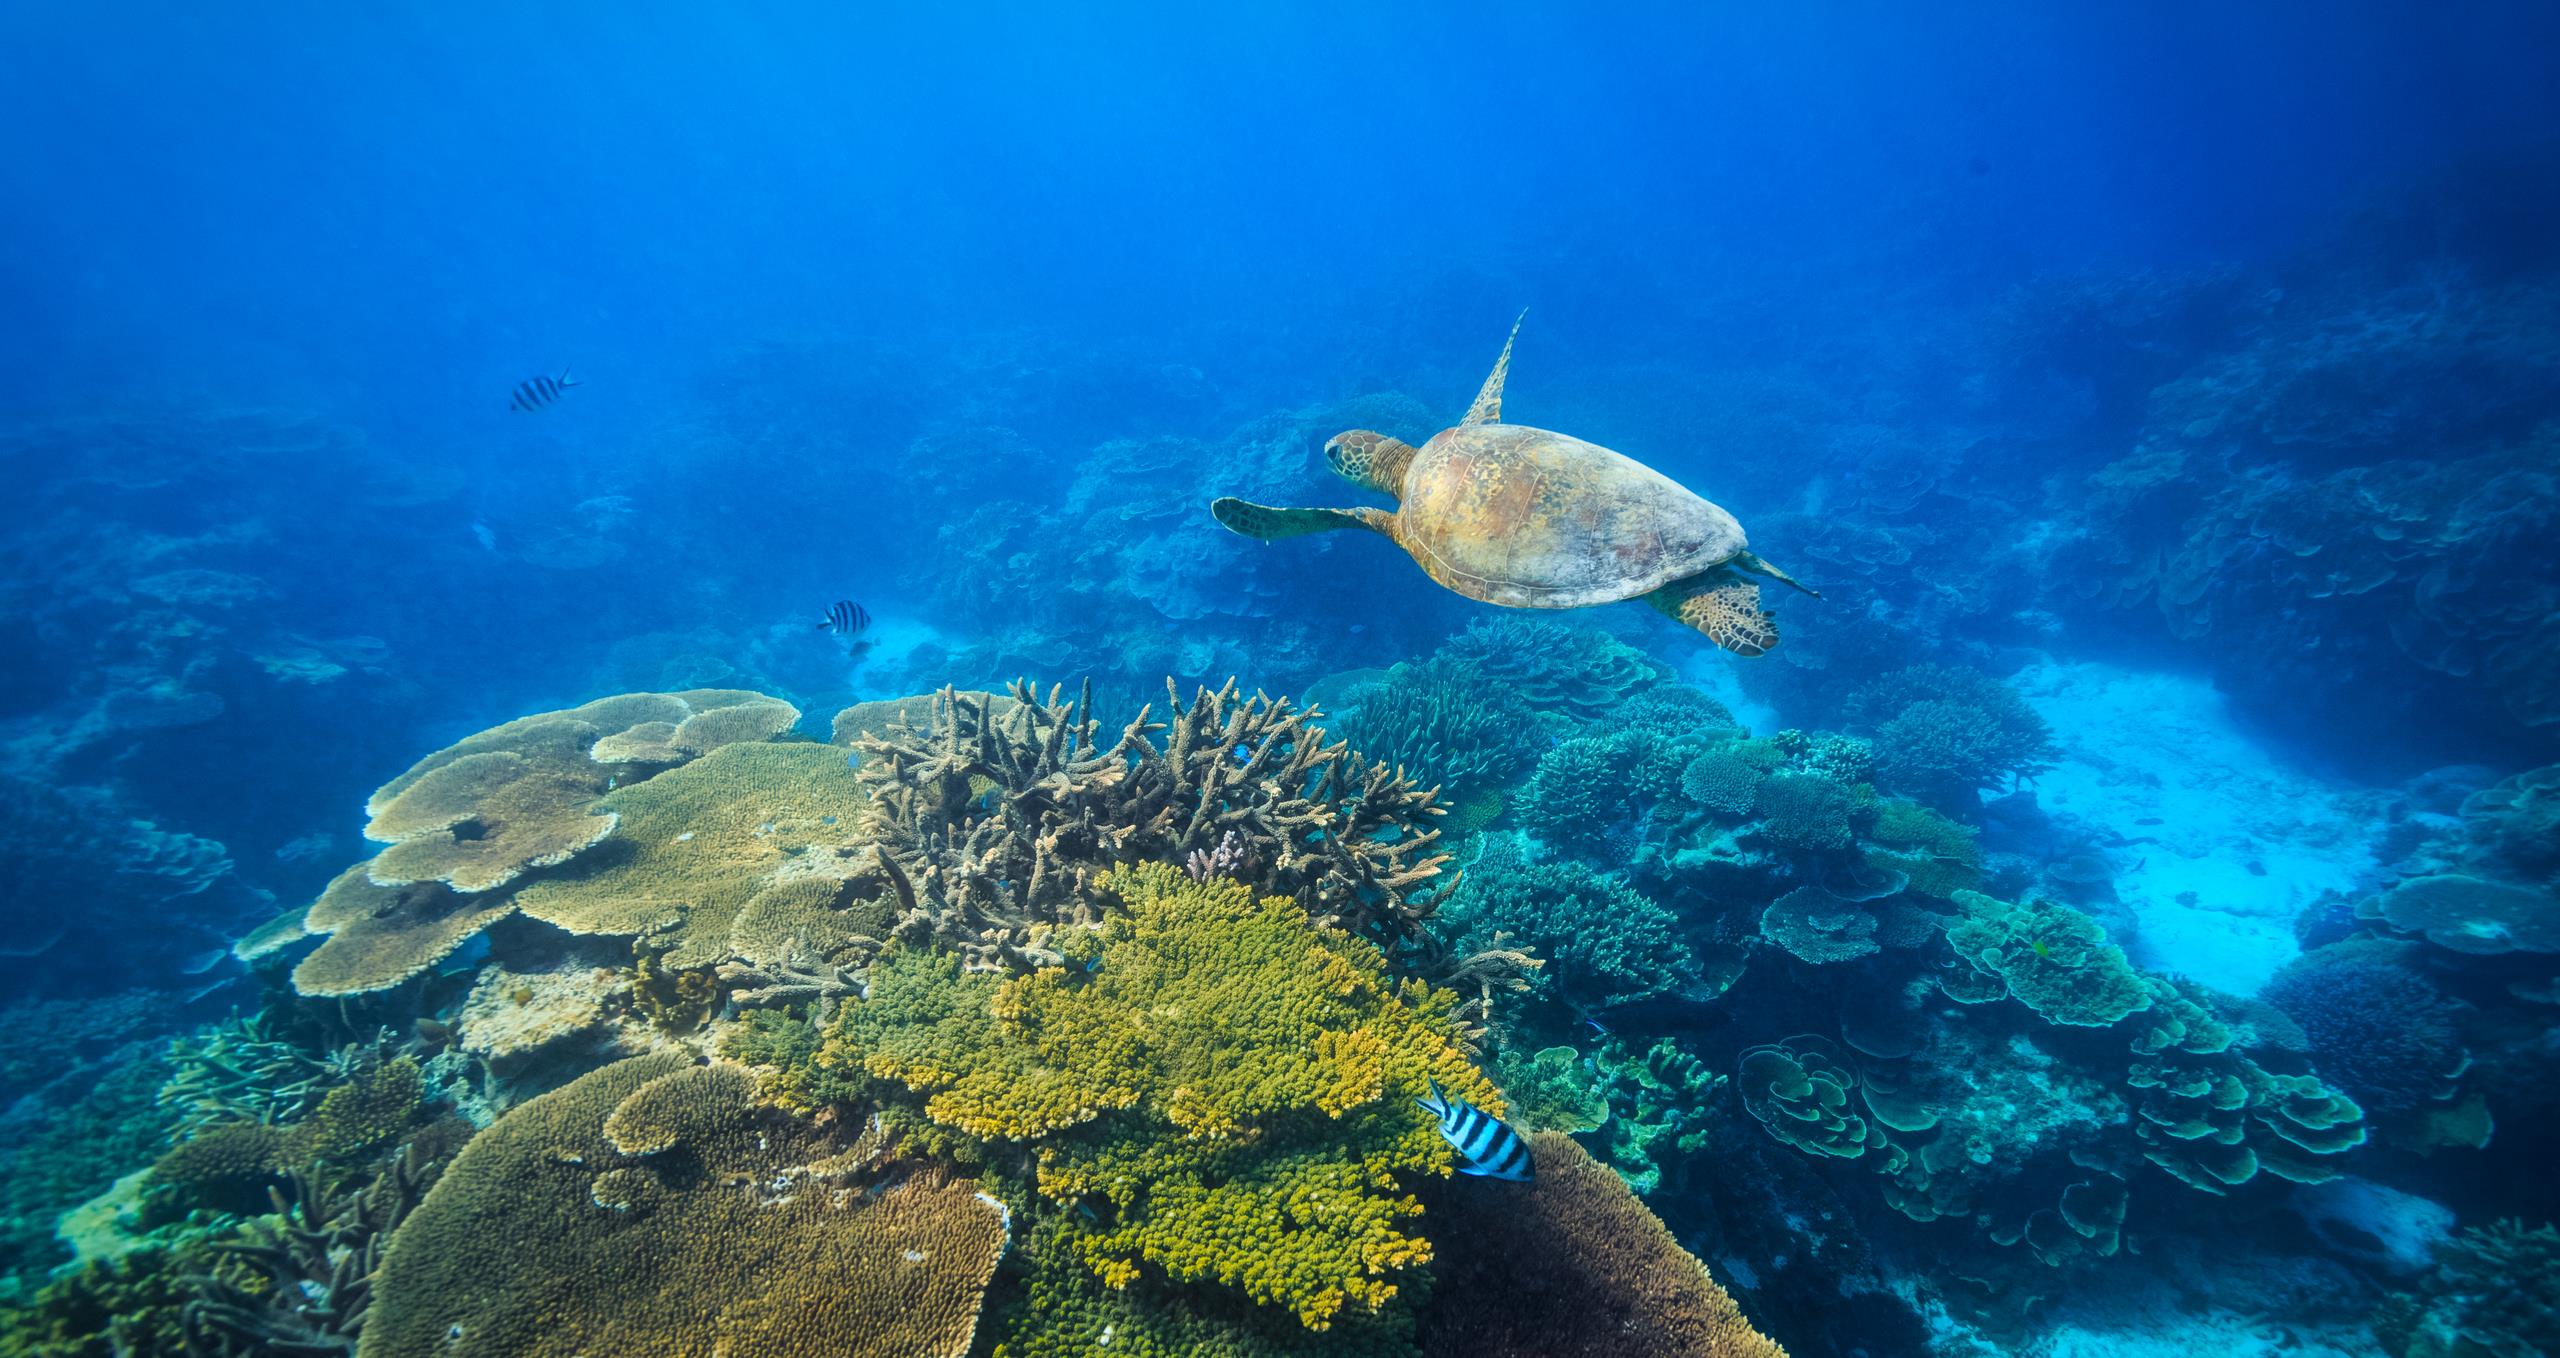 Marine life in the Great Barrier Reef